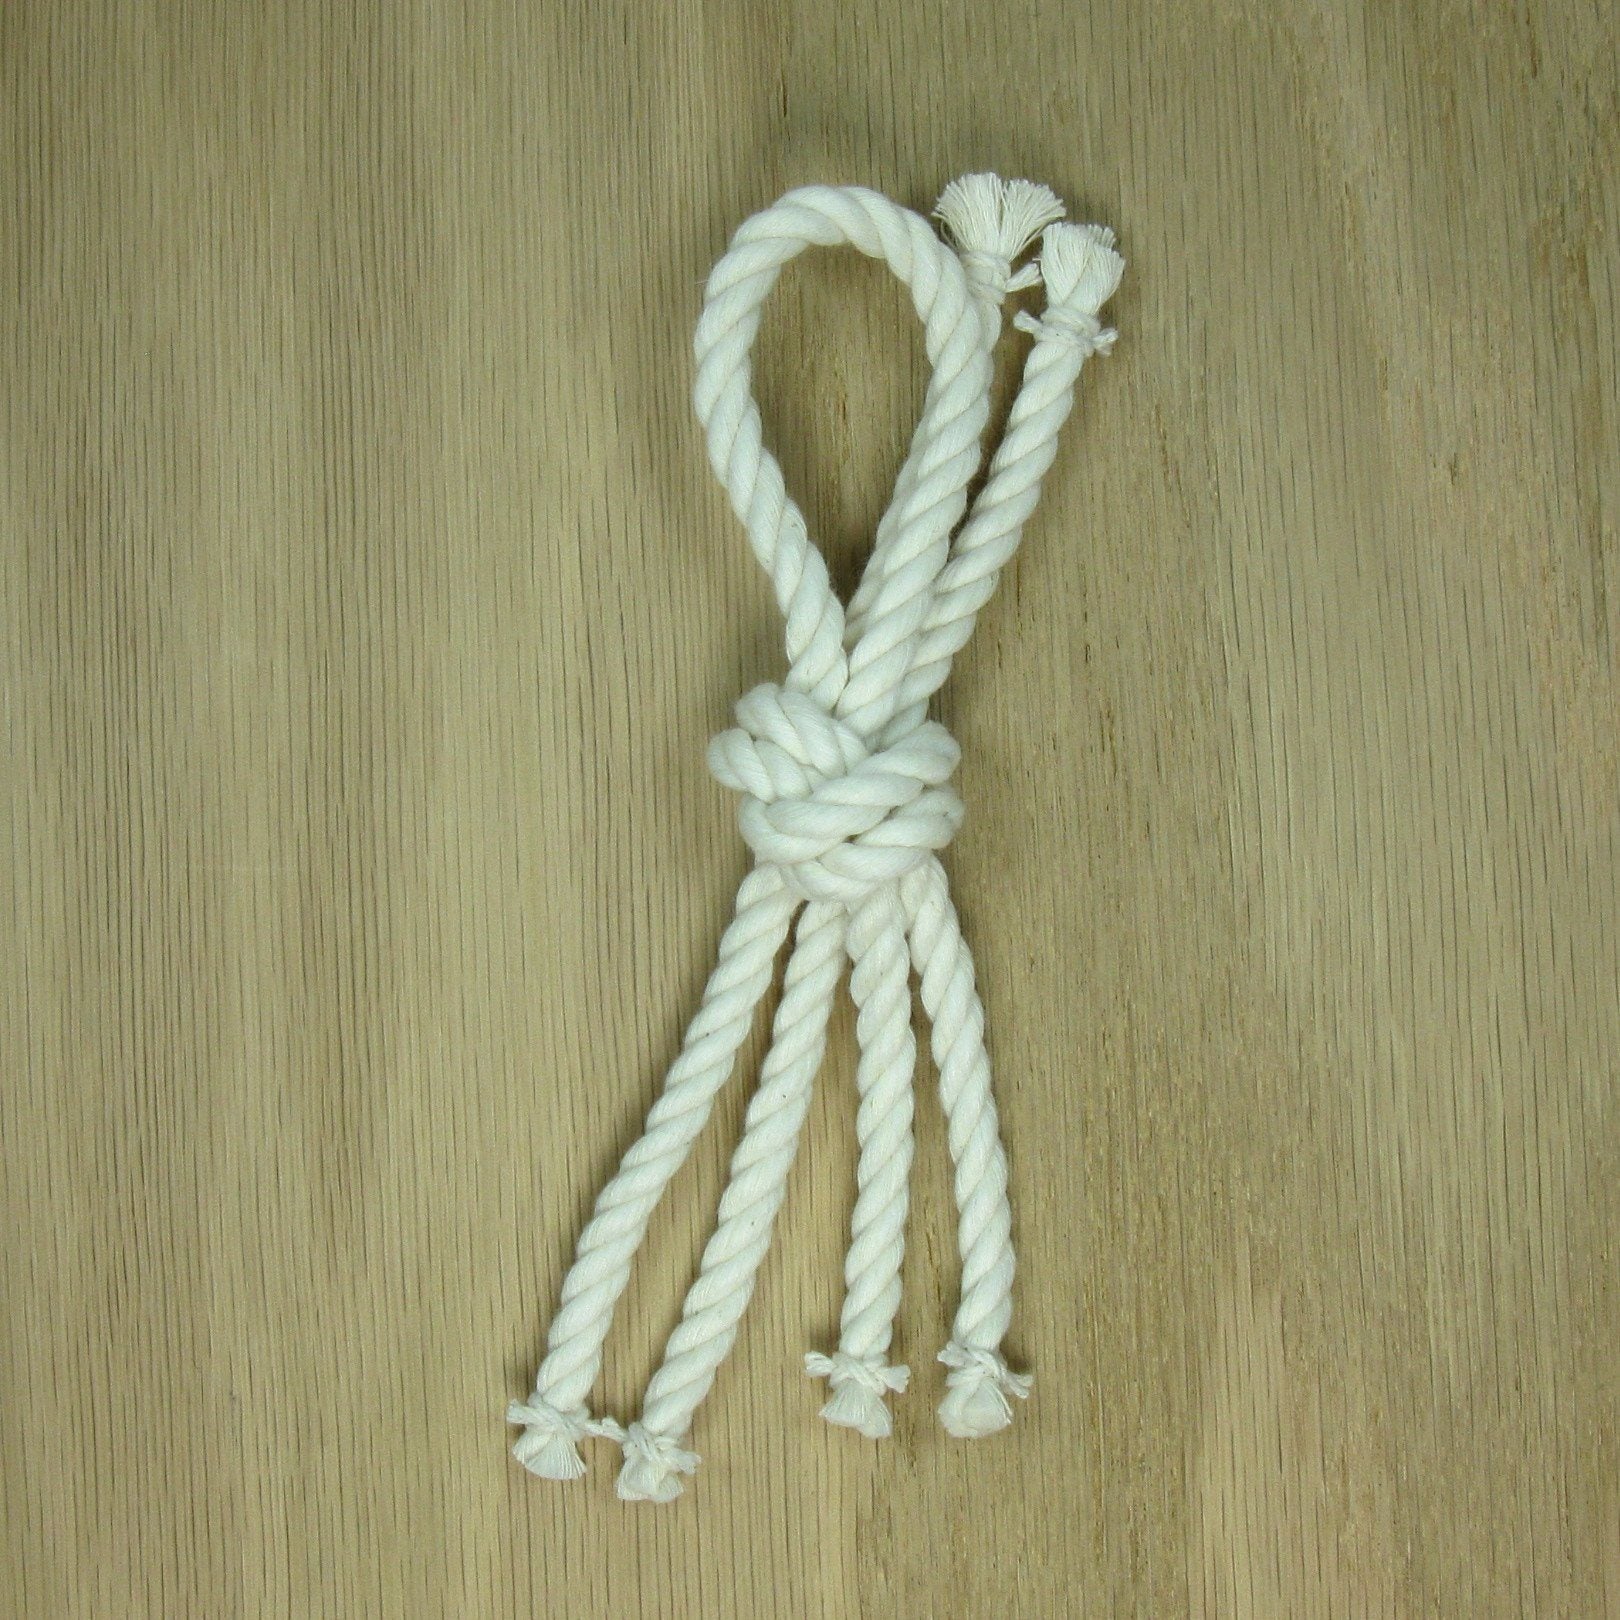 Nautical Knot Overhand Knot Boutonniere handmade at Mystic Knotwork